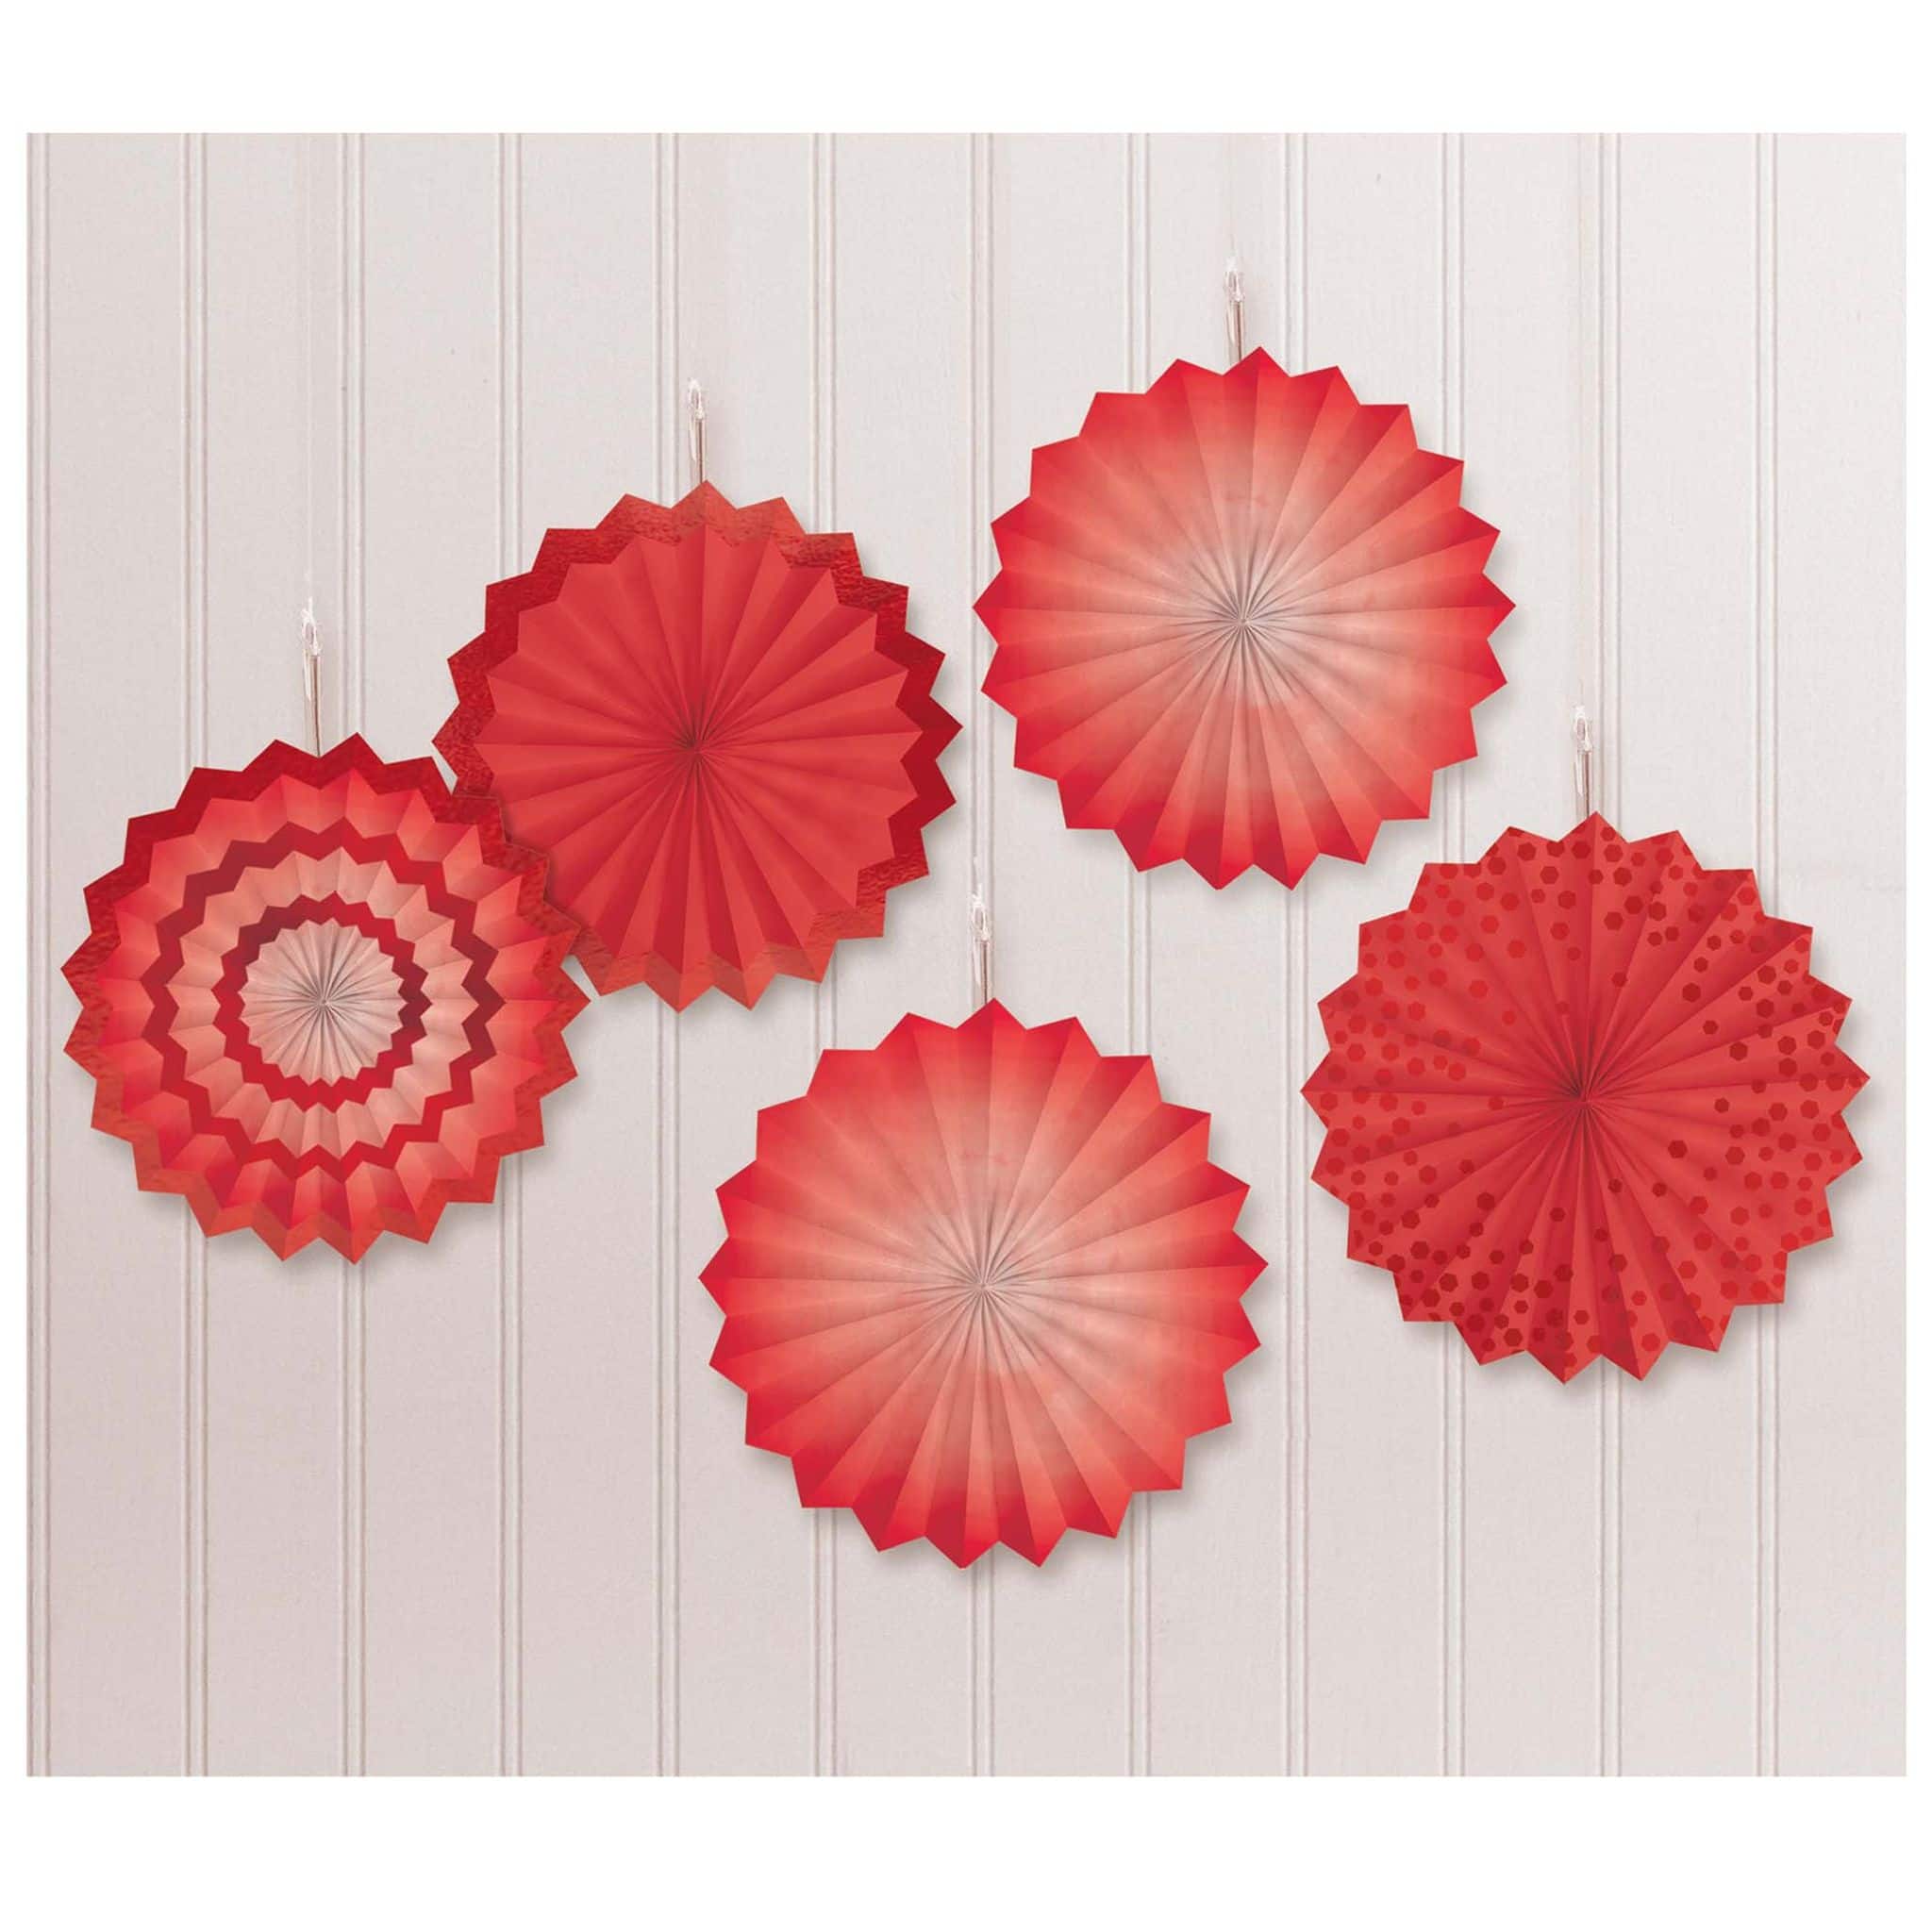 5" Hot Stamped Paper Fans, 15ct.